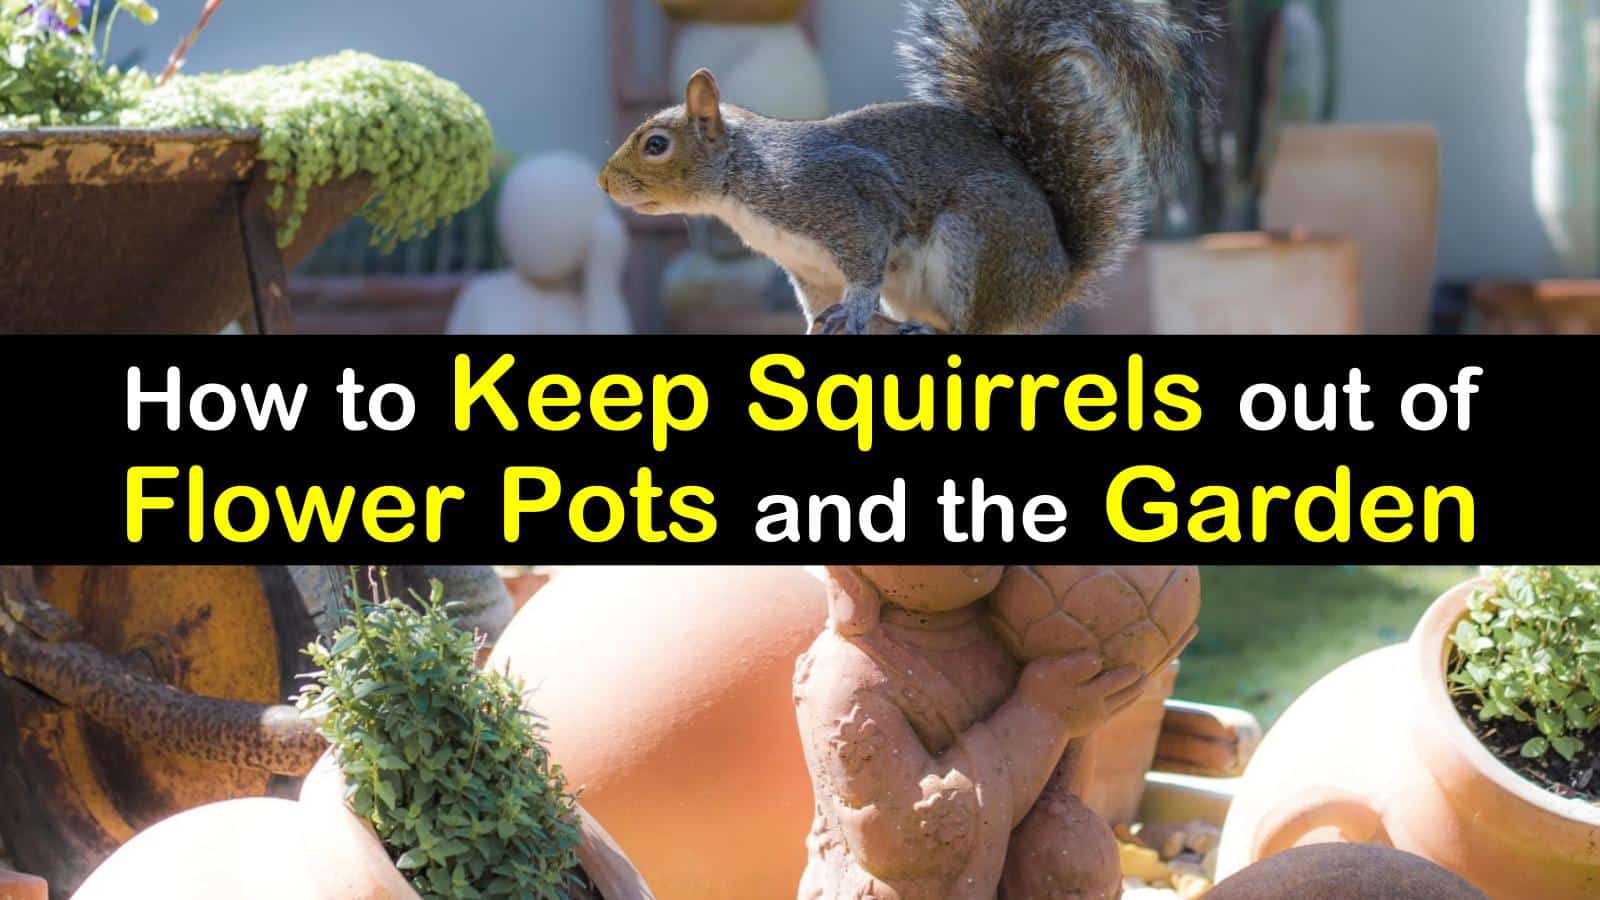 10 Smart Ways To Keep Squirrels Out Of Flower Pots The Garden